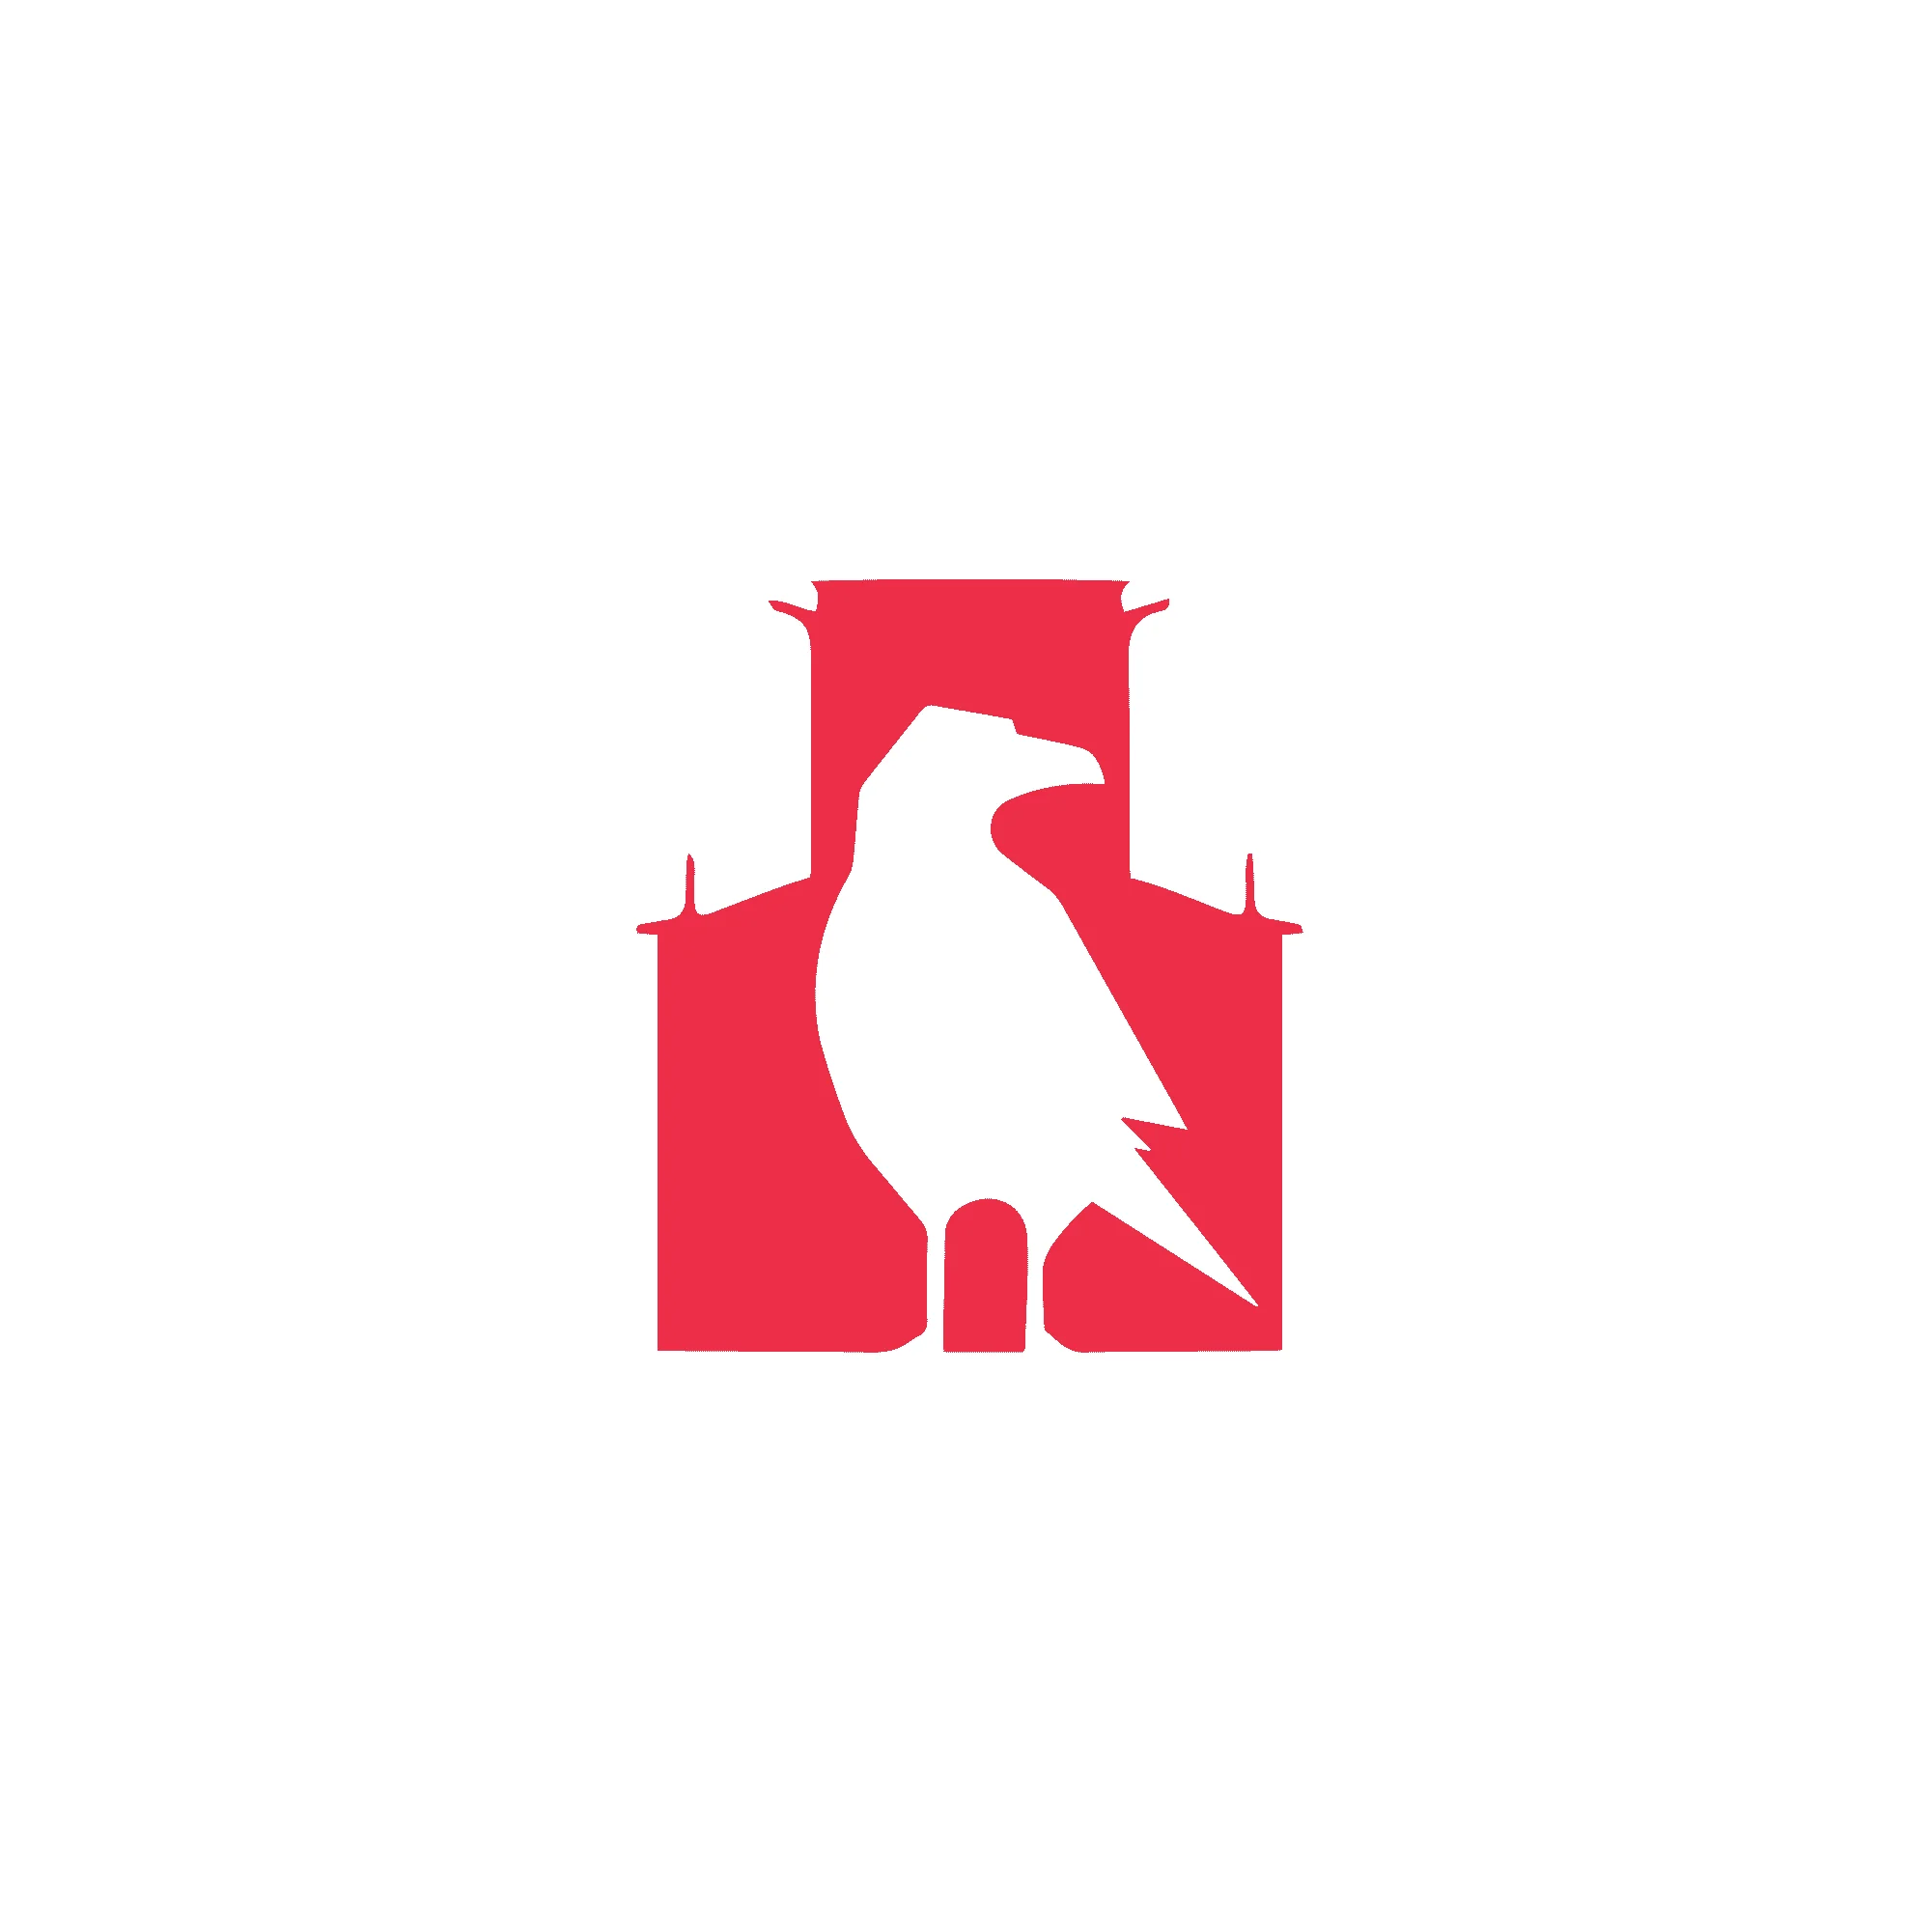 Branding logo design raven in a tower, red and white